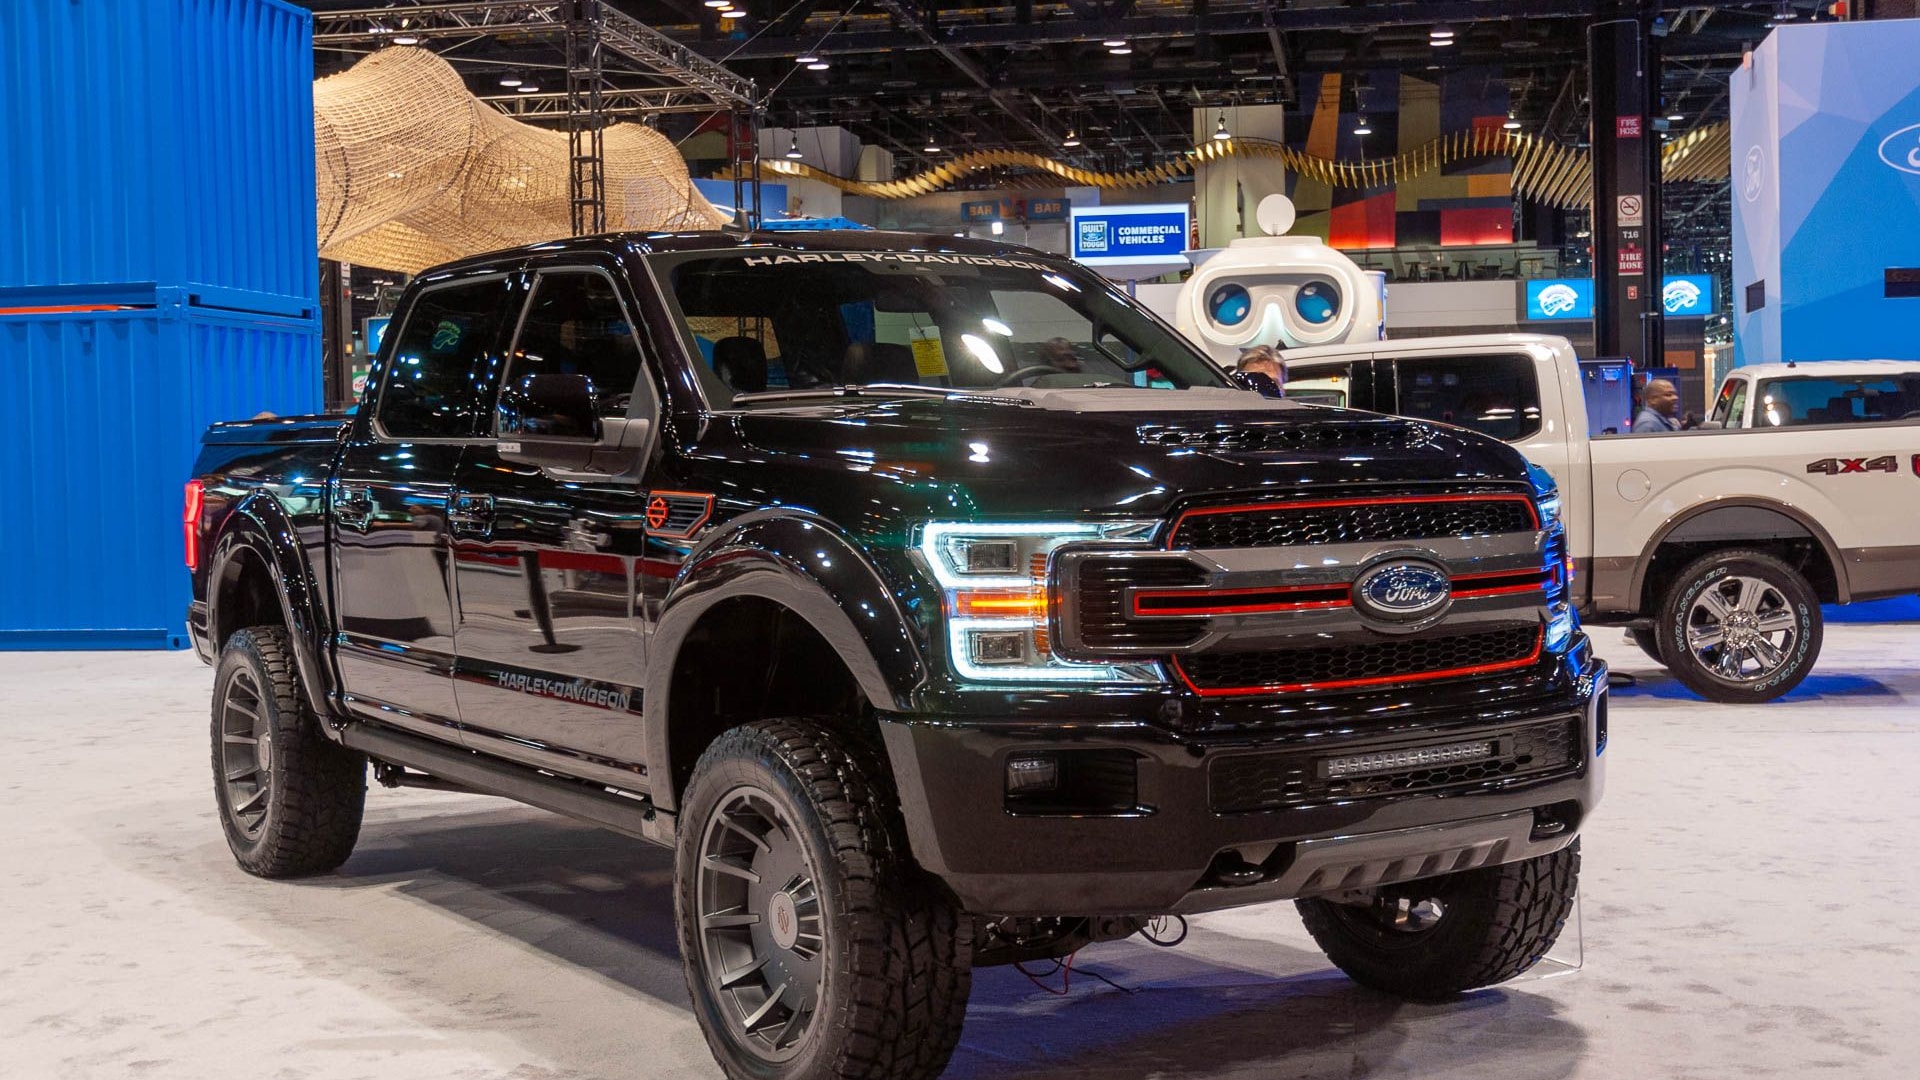 2020 Ford F-150 Harley-Davidson by Tuscany Motors, 2020 Chicago Auto Show